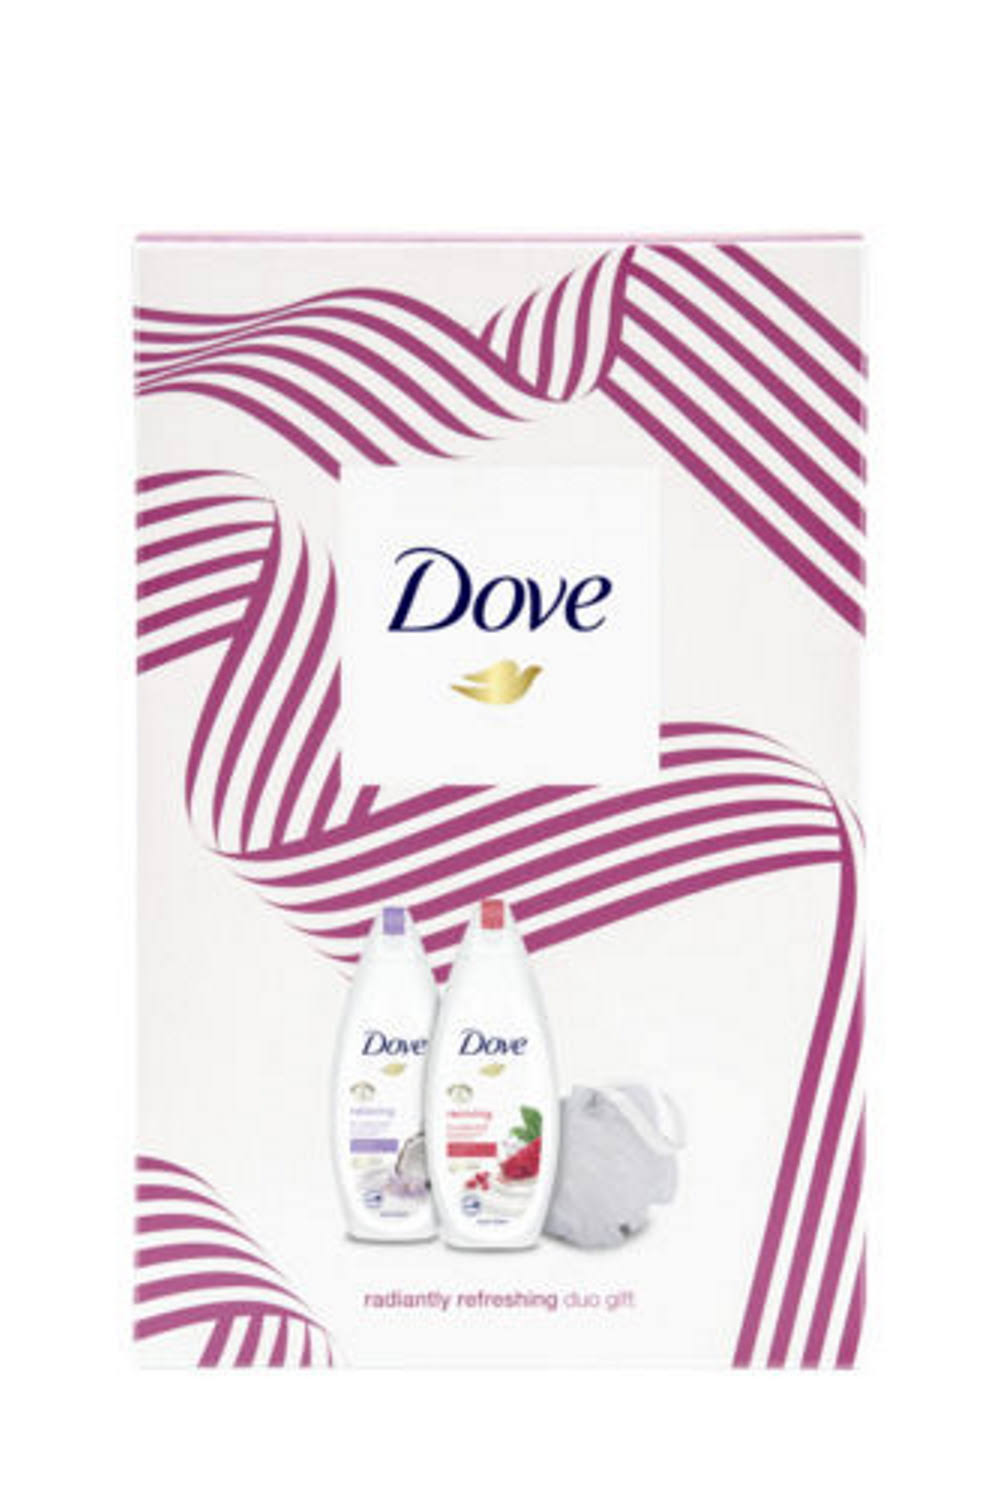 Dove Radiantly Refreshing Care Body Duo Gift Set